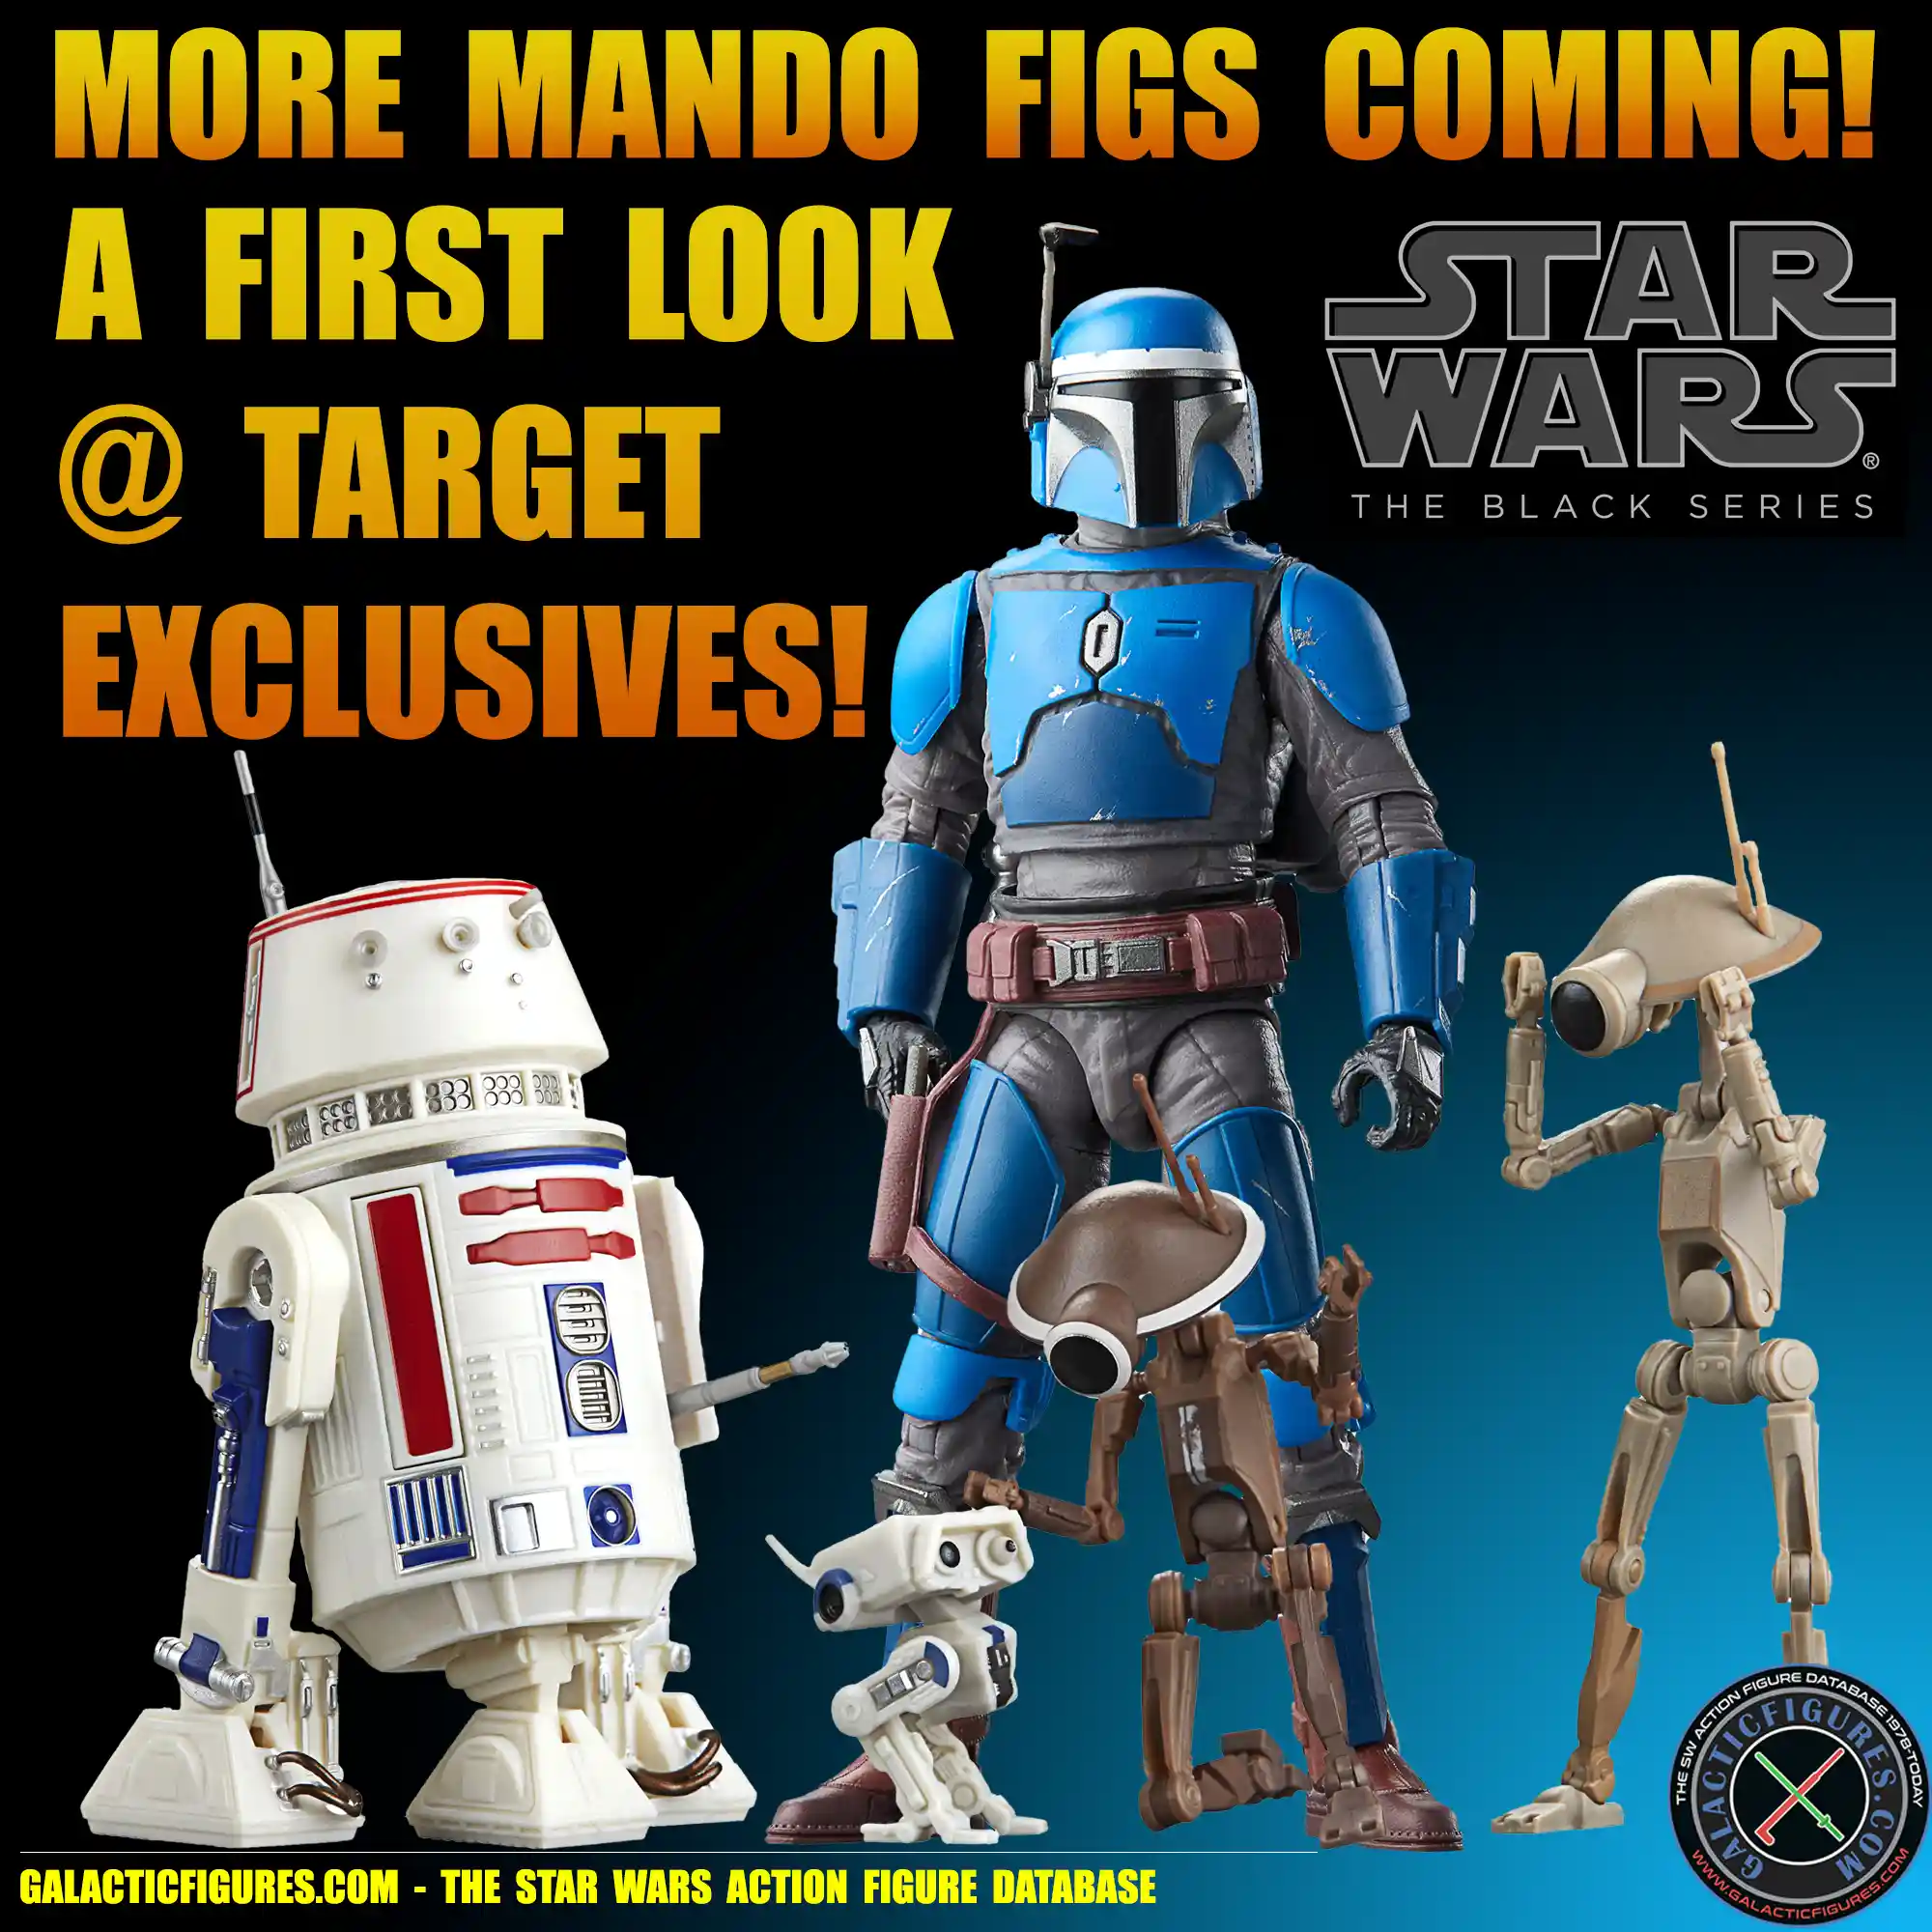 Hasbro Shows New Black Series Figures From The Mandalorian